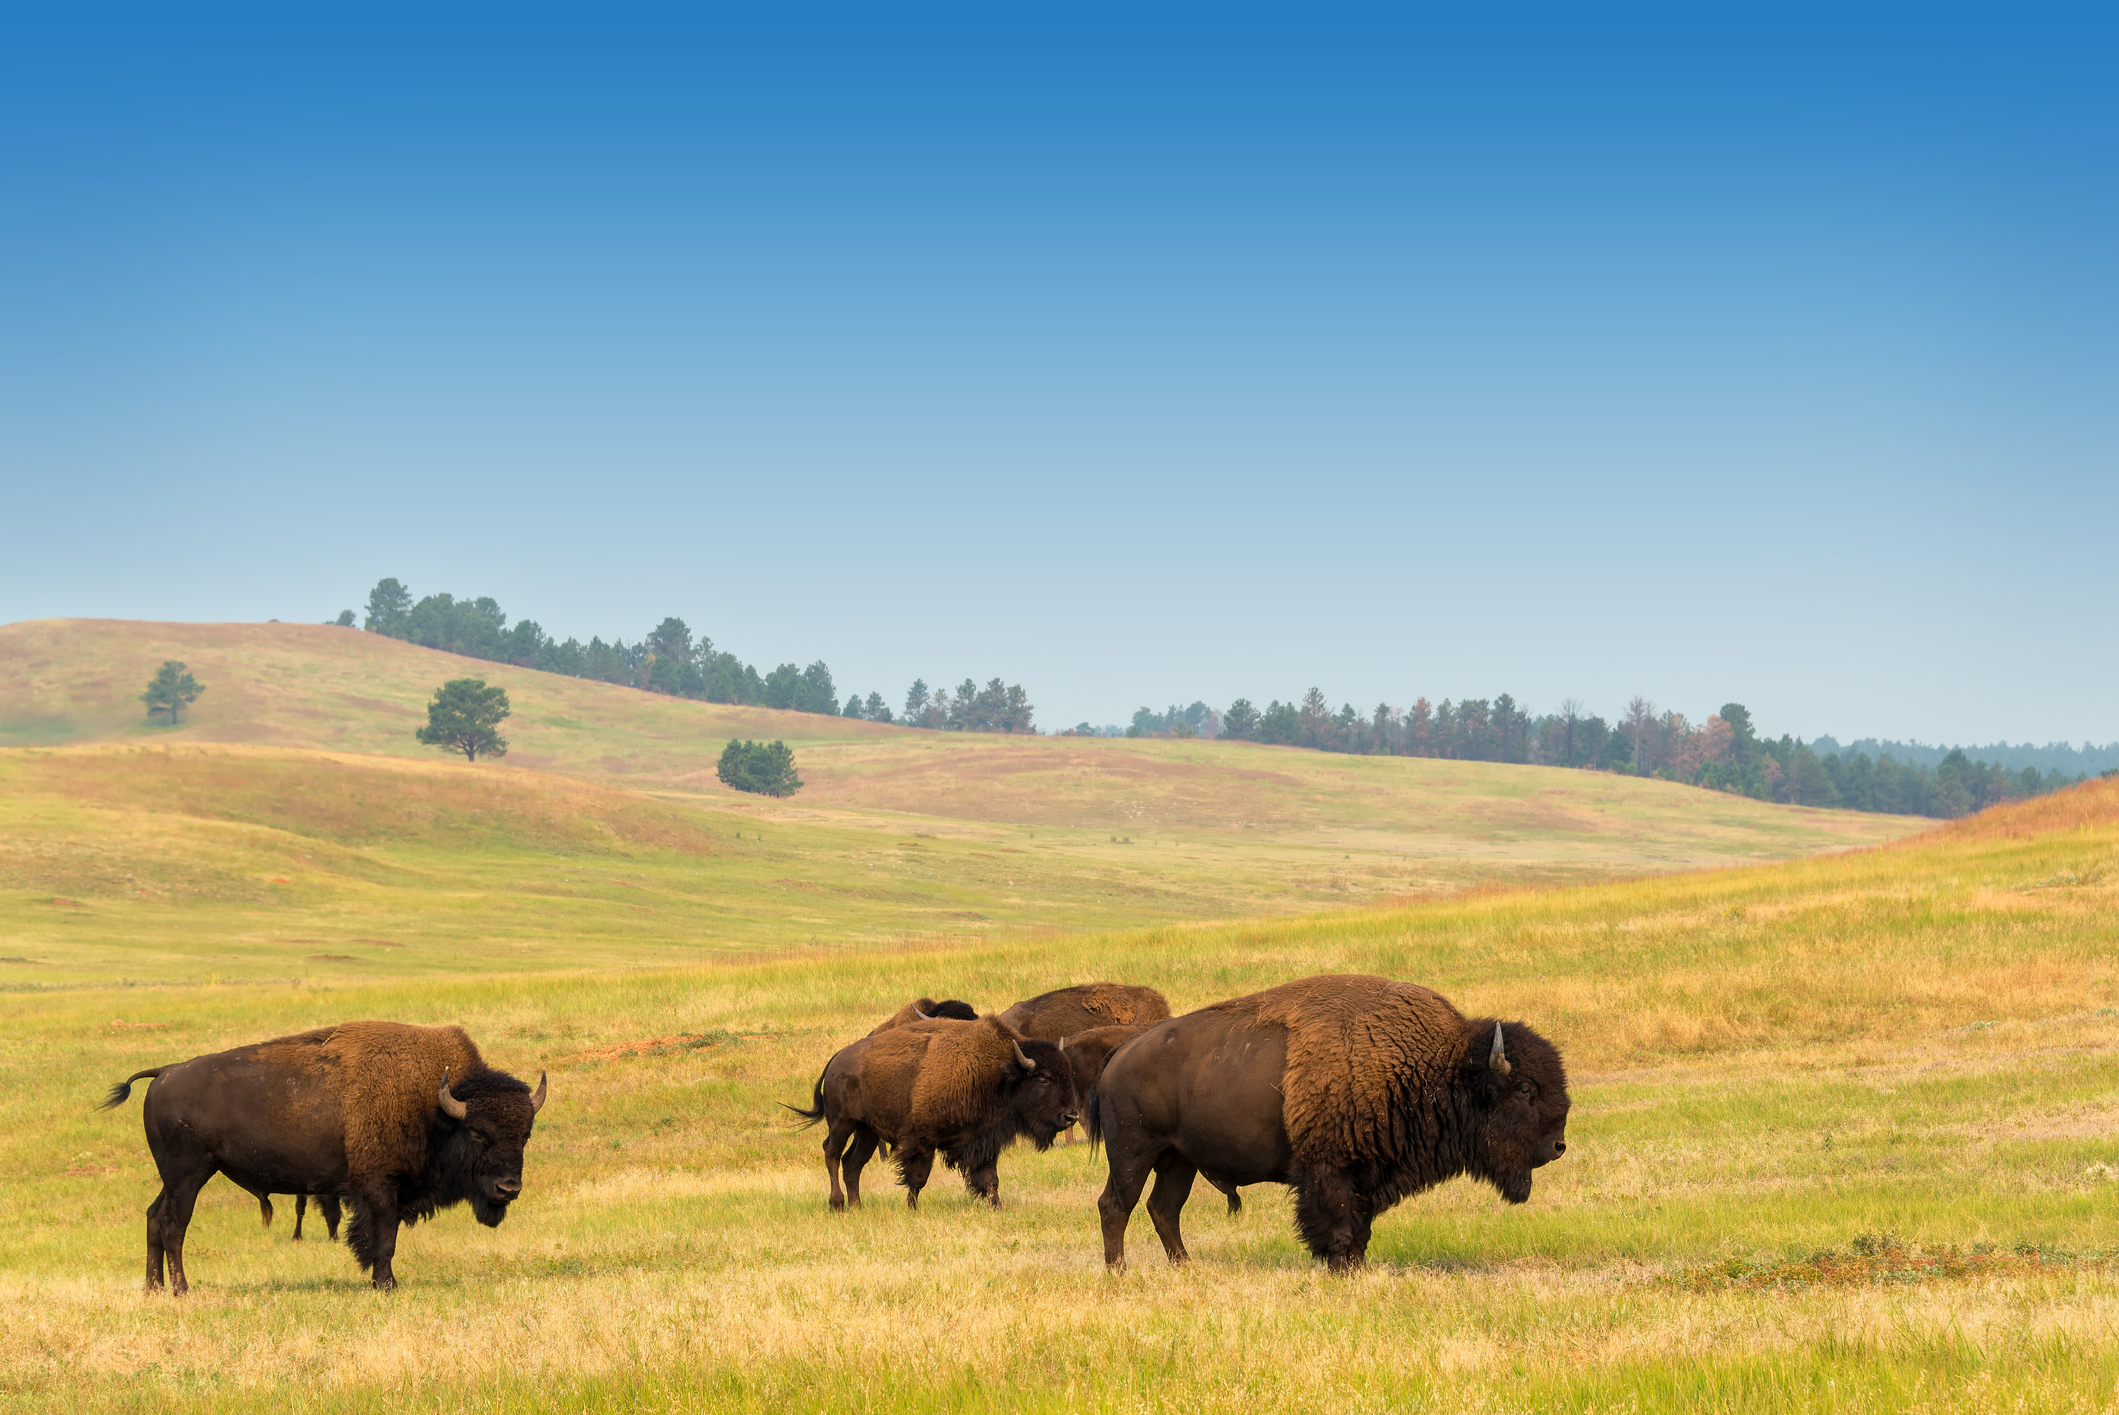 Four bison graze on grass on gently rolling hills.